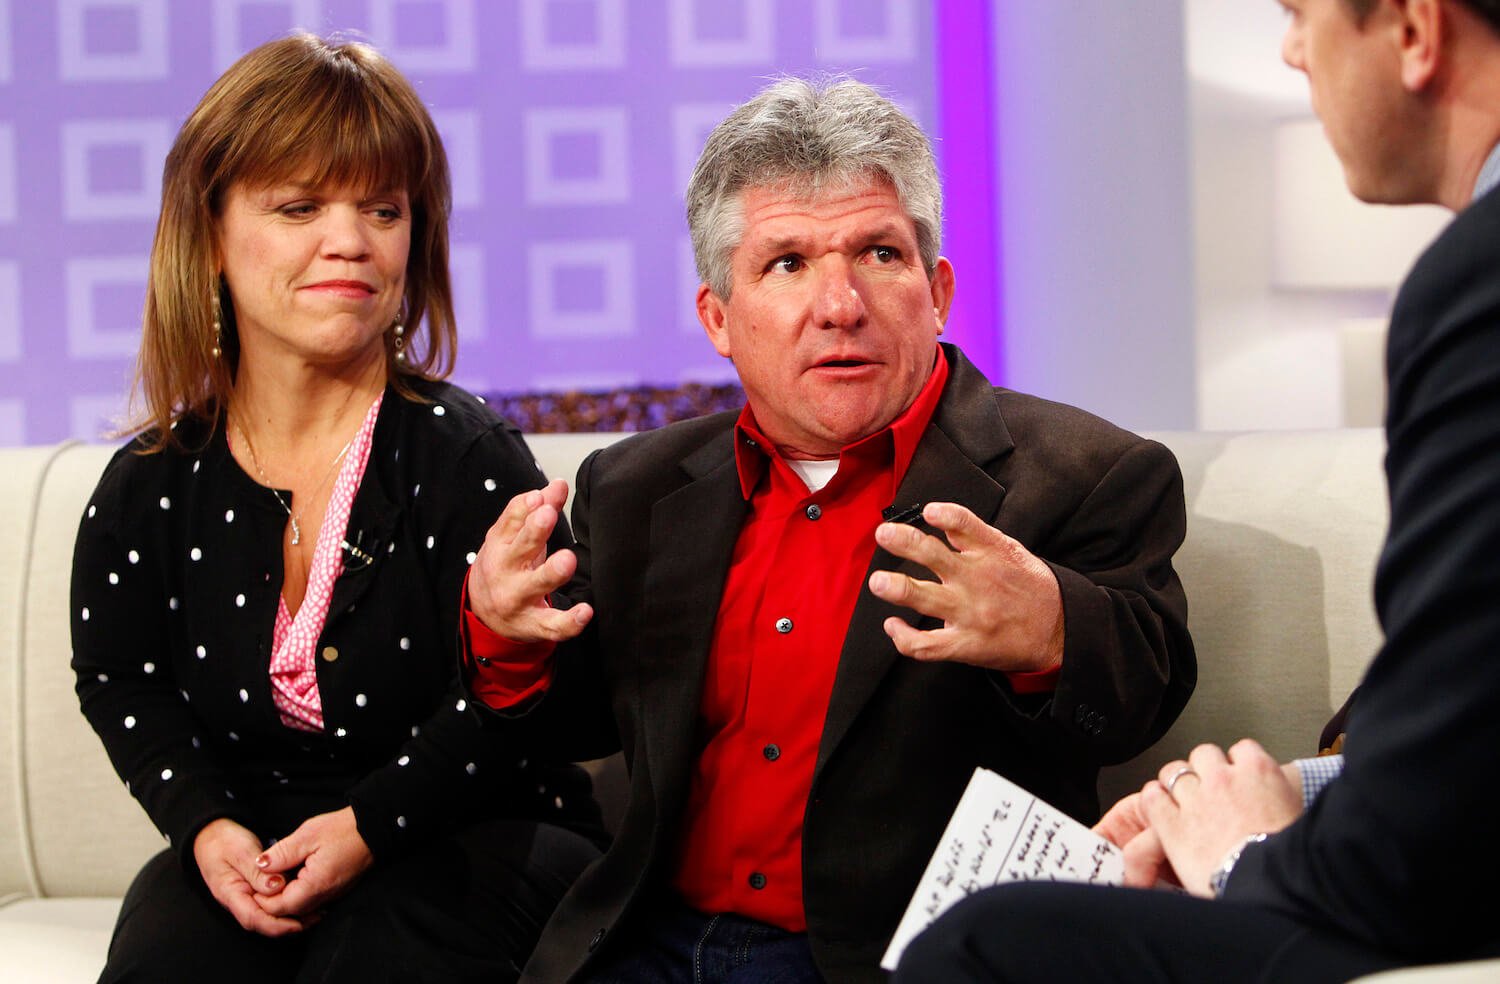 Amy Roloff and Matt Roloff from 'Little People, Big World' talking in an interview